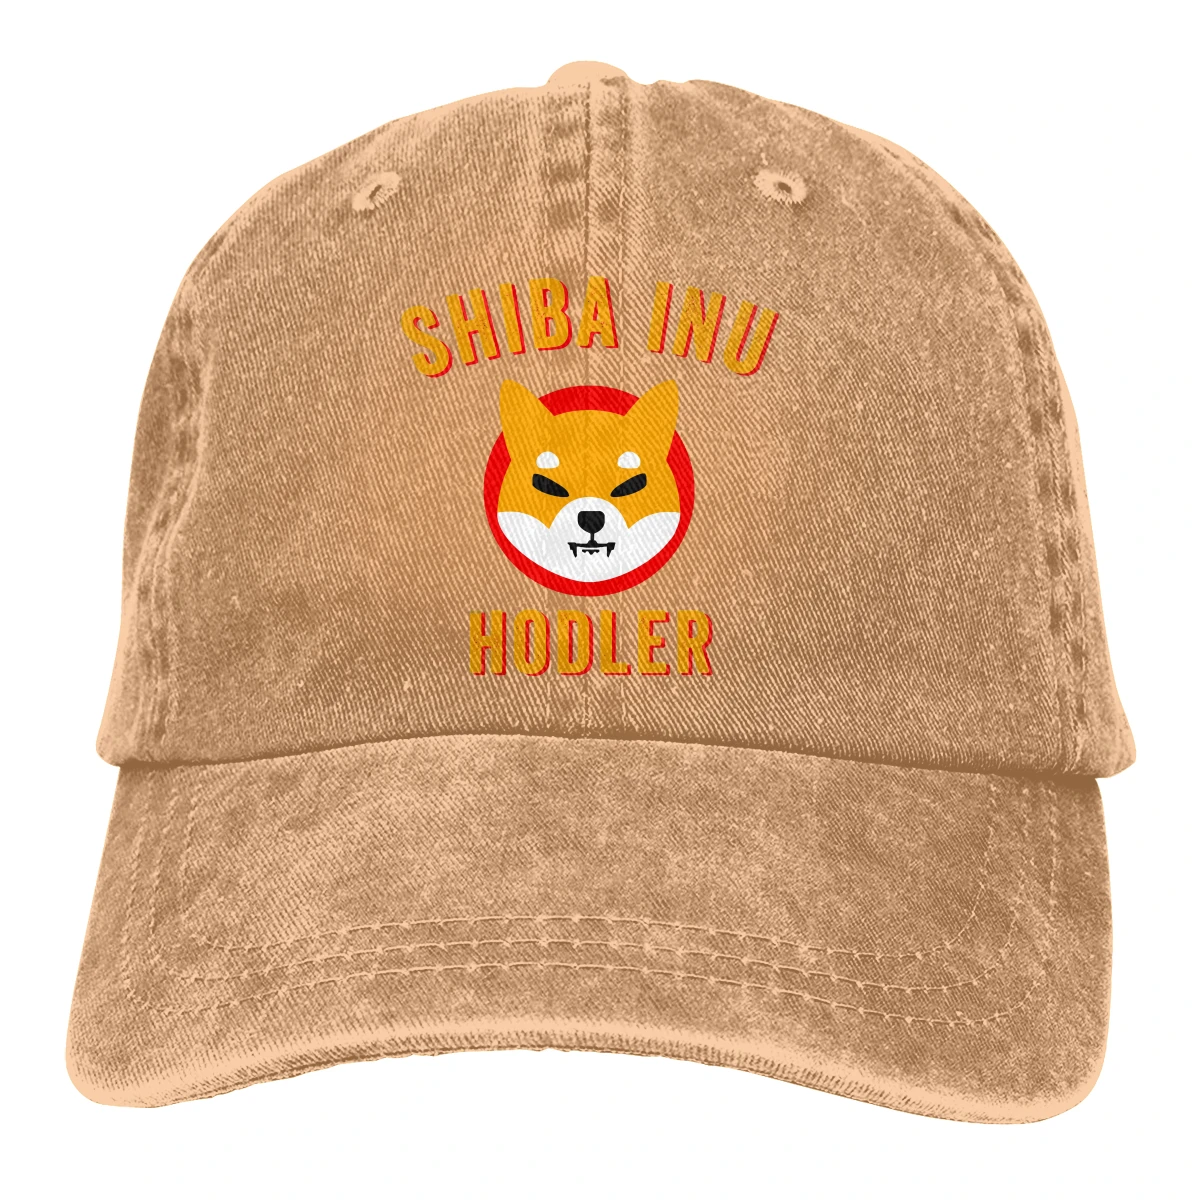 

2020 New Best Selling Summer Cap Sun Visor Hodler Hip Hop Caps Shiba Inu Coin Crypto Miners Cowboy Hat Peaked Hats for Men